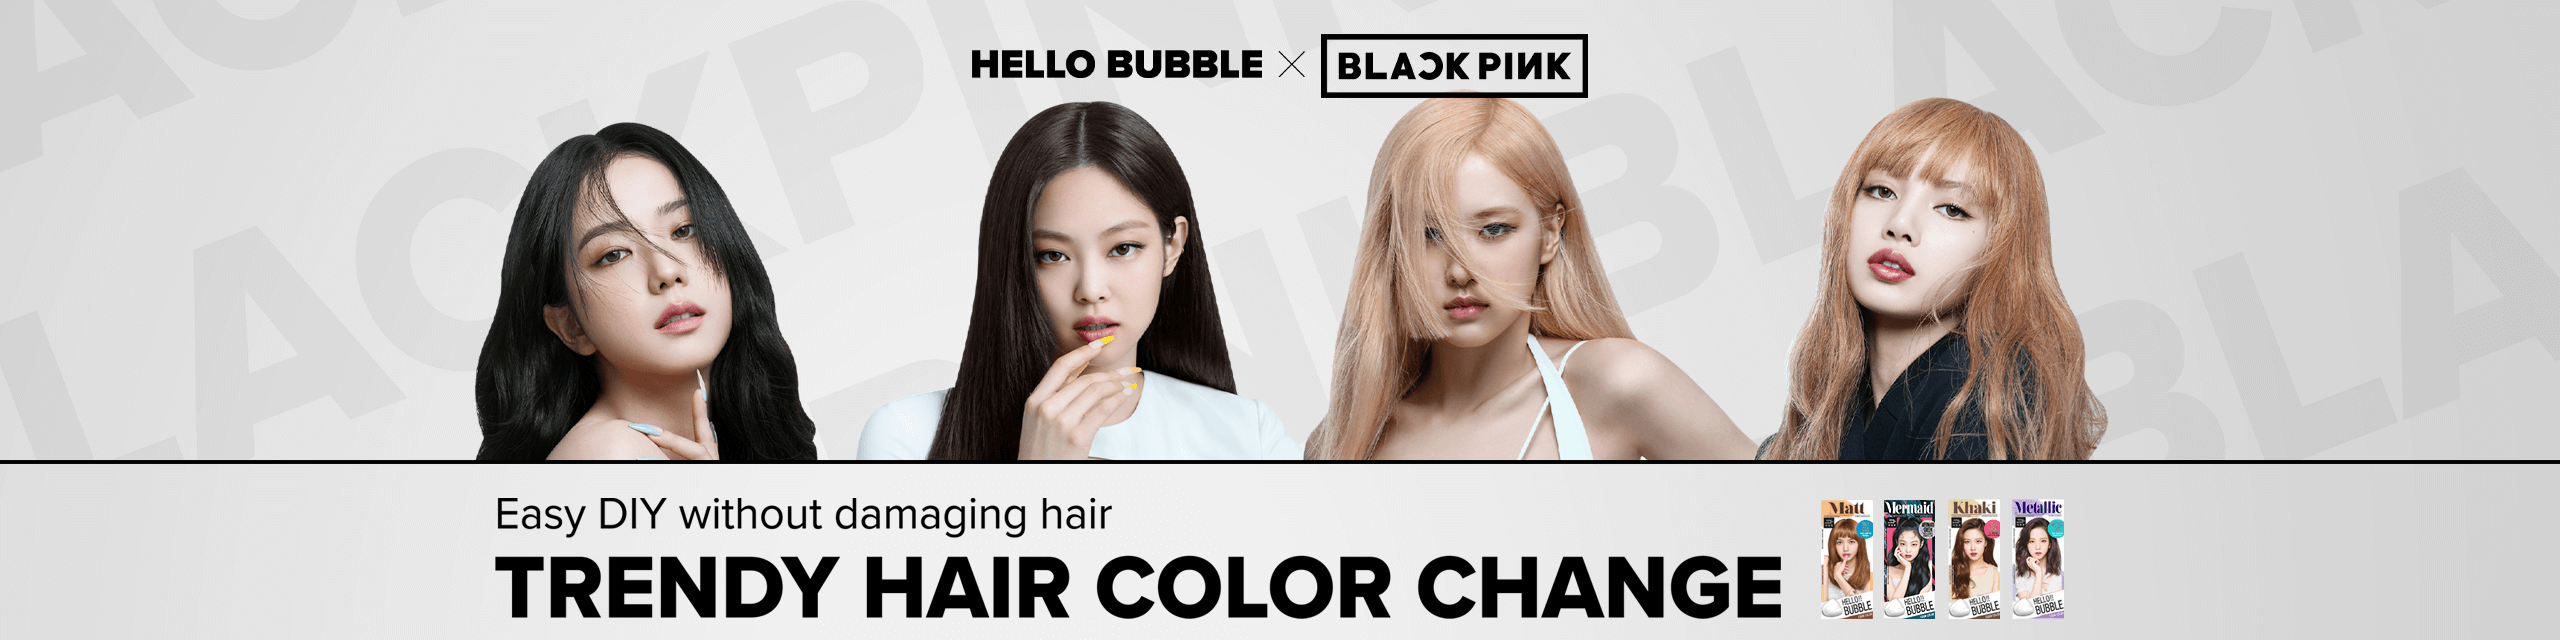 hair color category